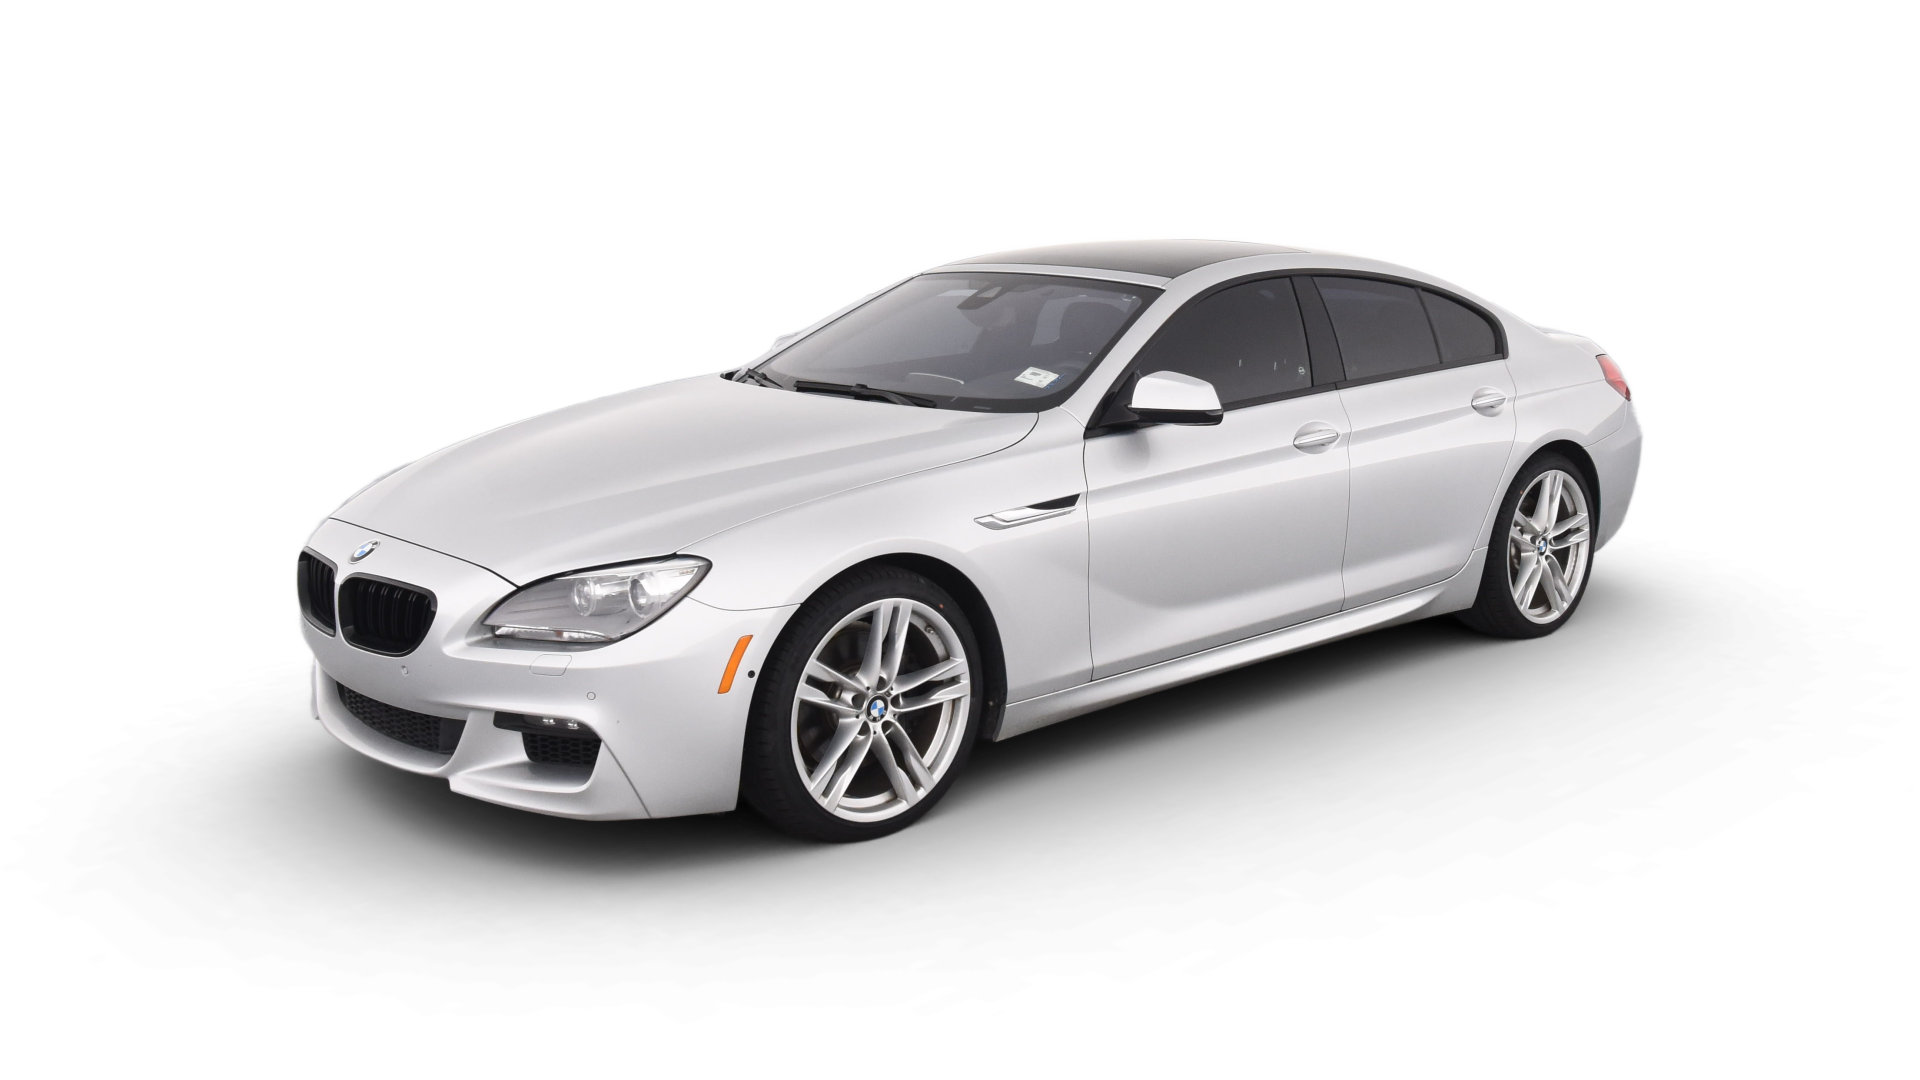 Used BMW 6 Series For Sale Online | Carvana